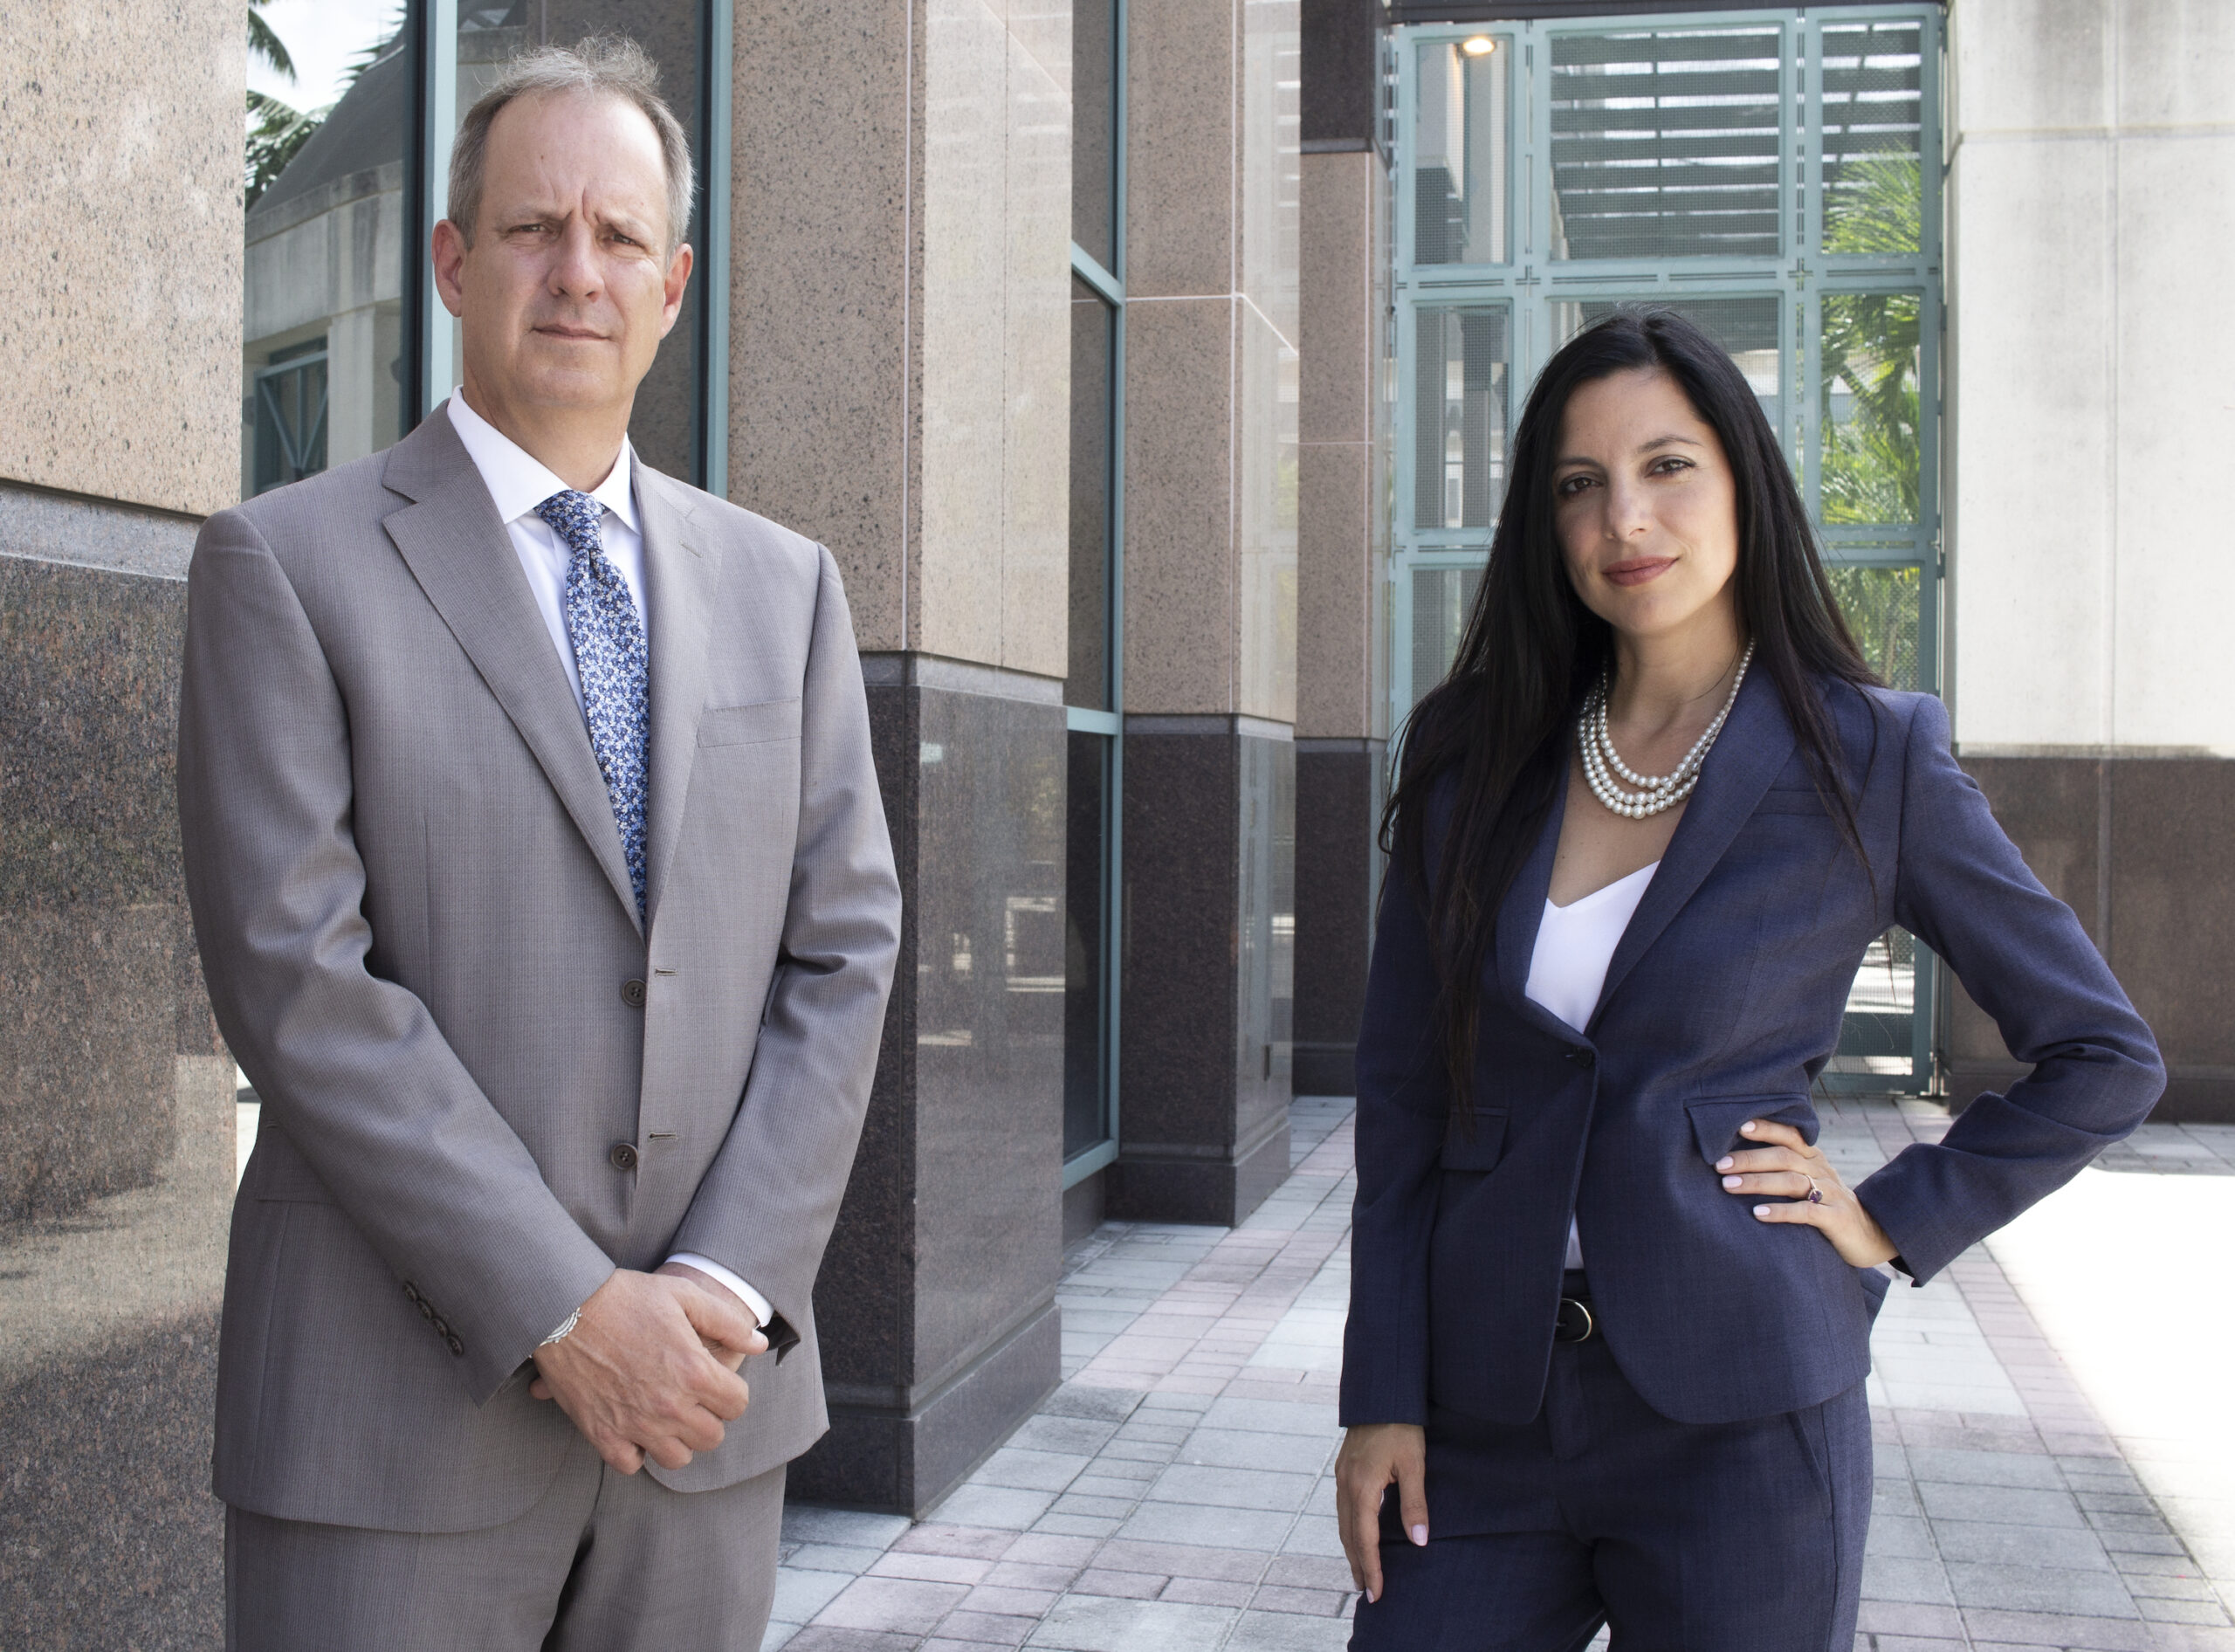 South Florida Wrongful Death Attorney